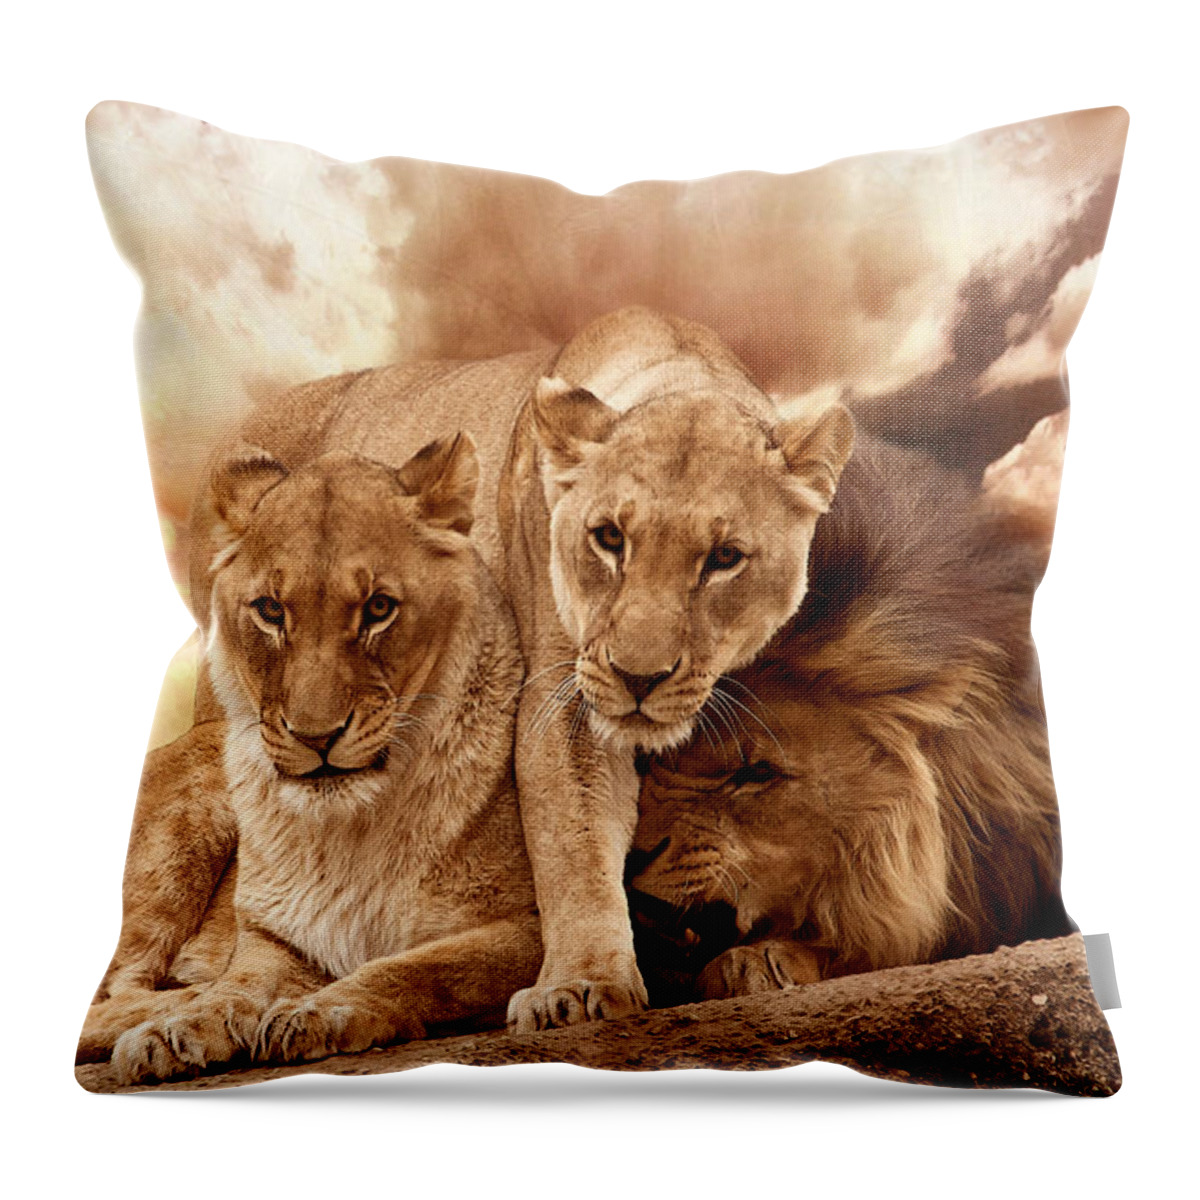 Lion Throw Pillow featuring the photograph Lions #1 by Christine Sponchia